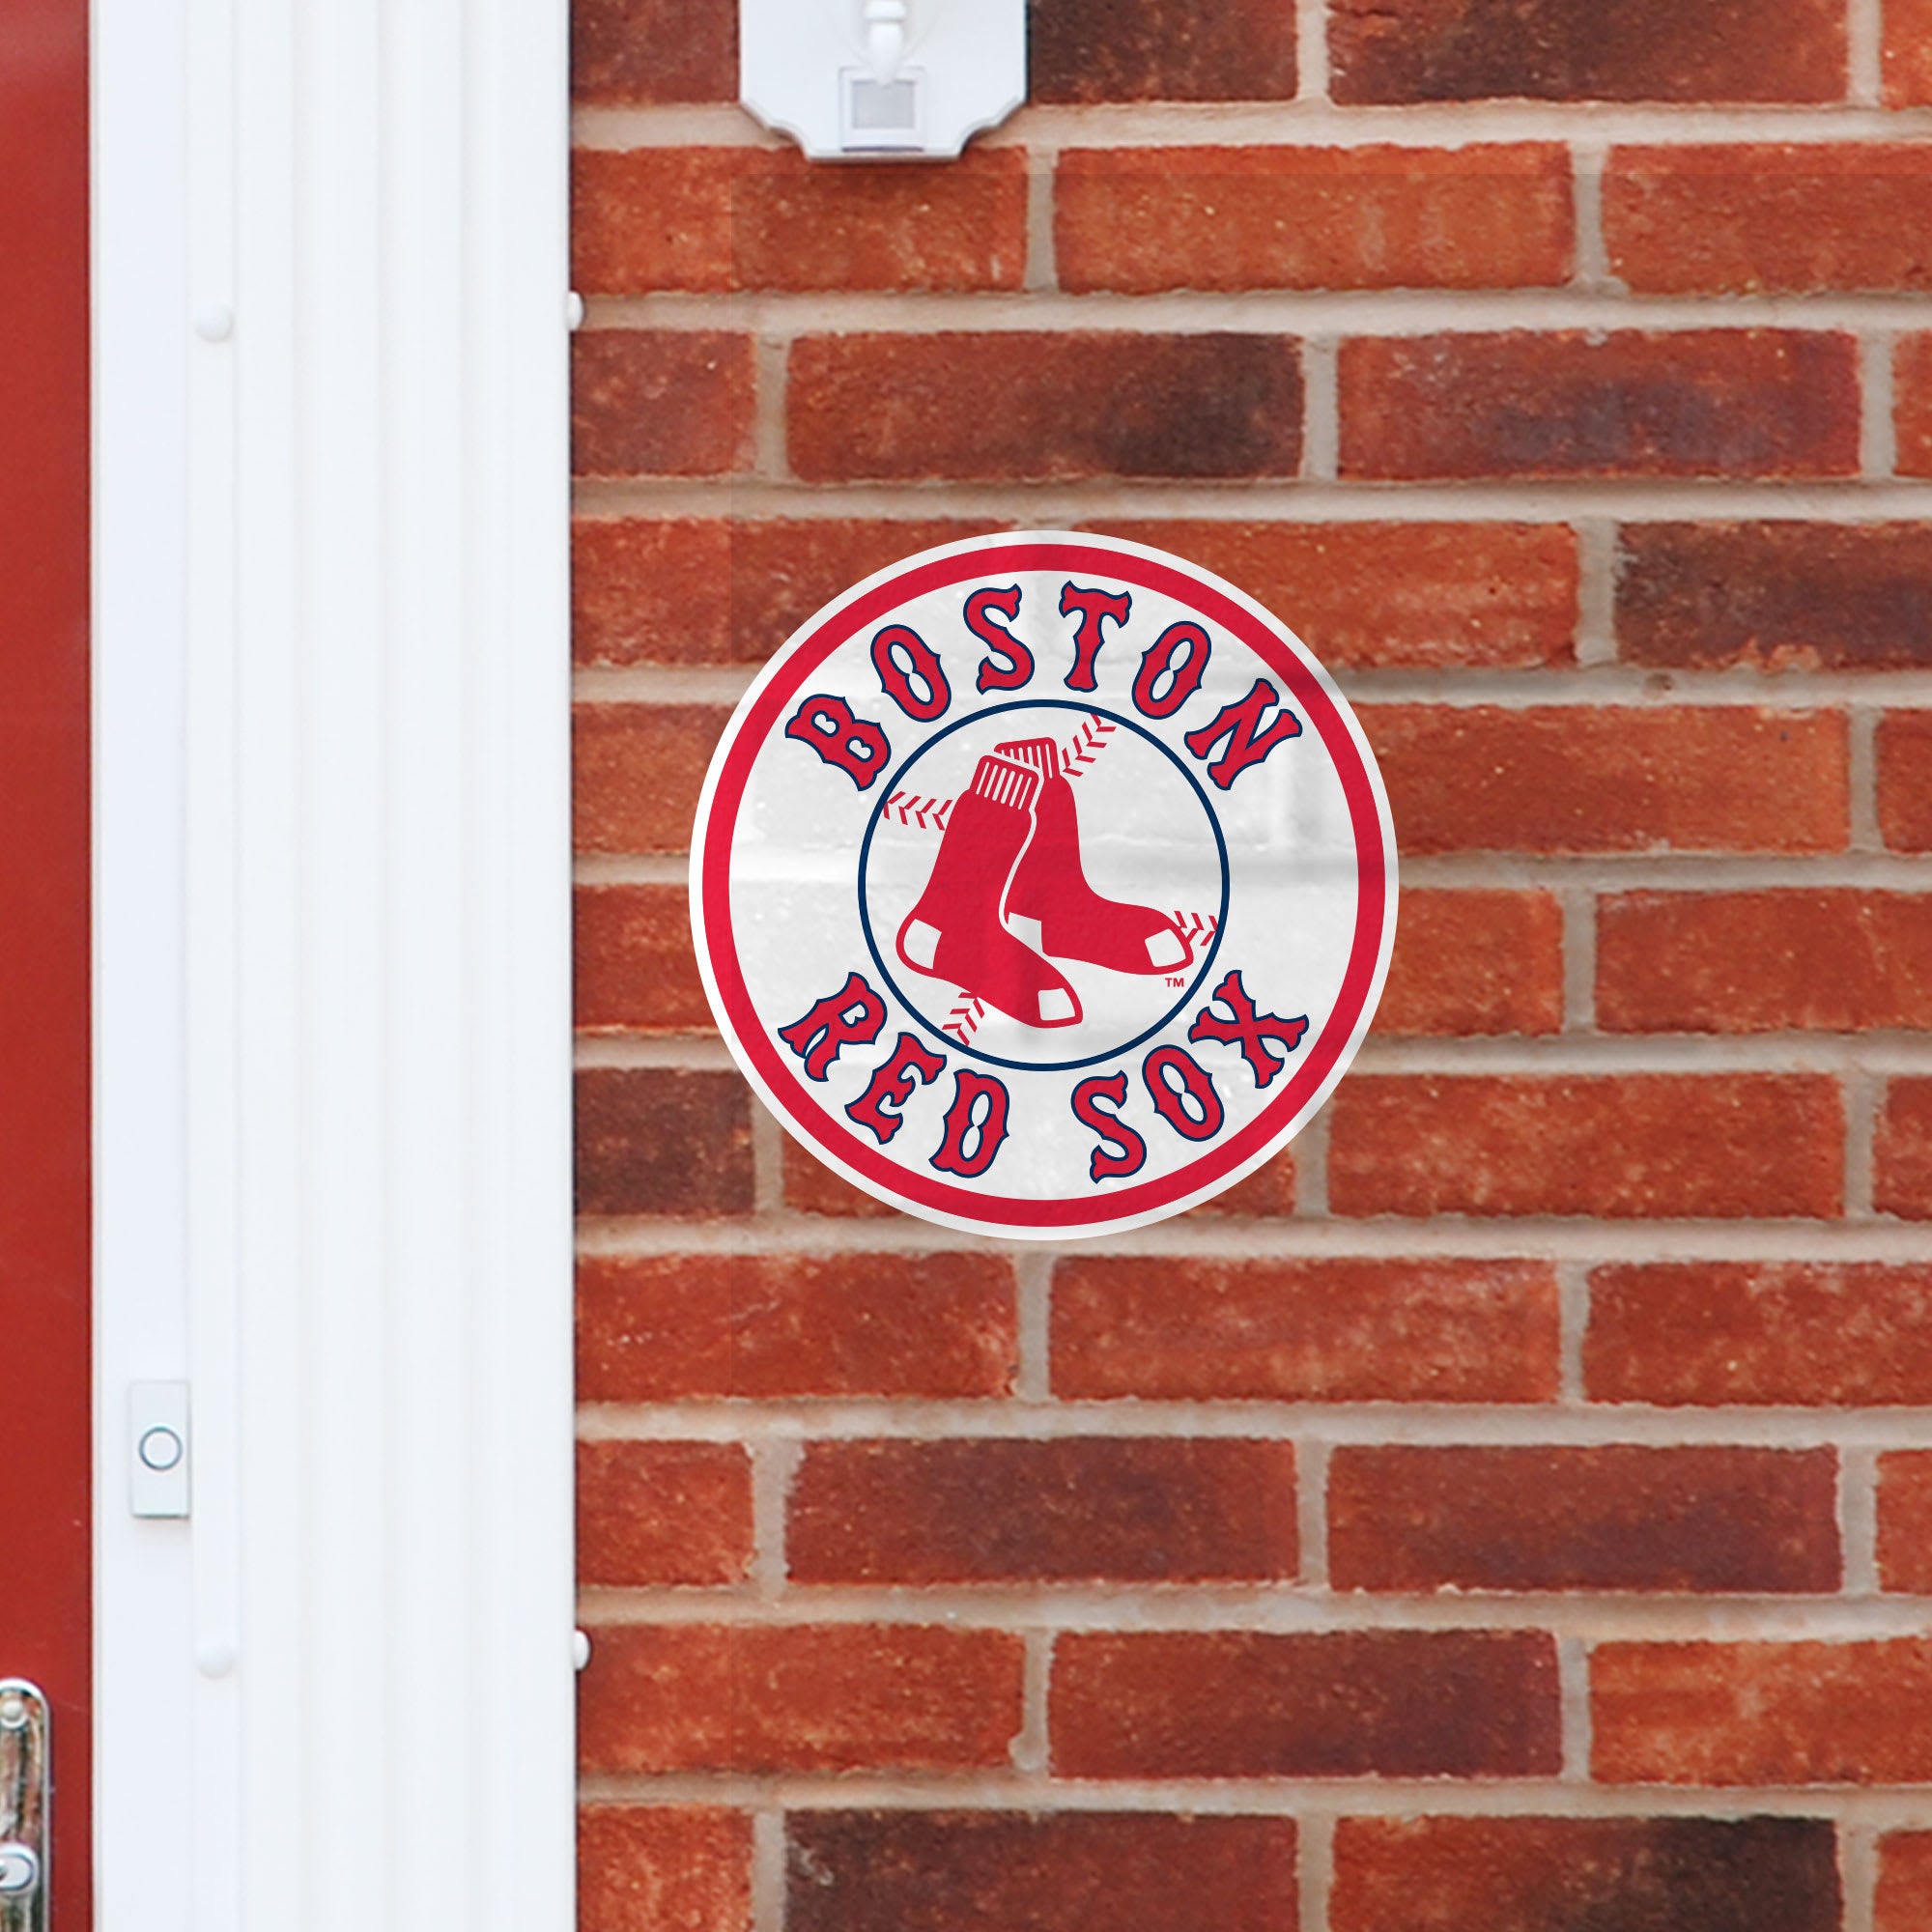 Boston Red Sox: Logo - Officially Licensed MLB Outdoor Graphic Large by Fathead | Wood/Aluminum